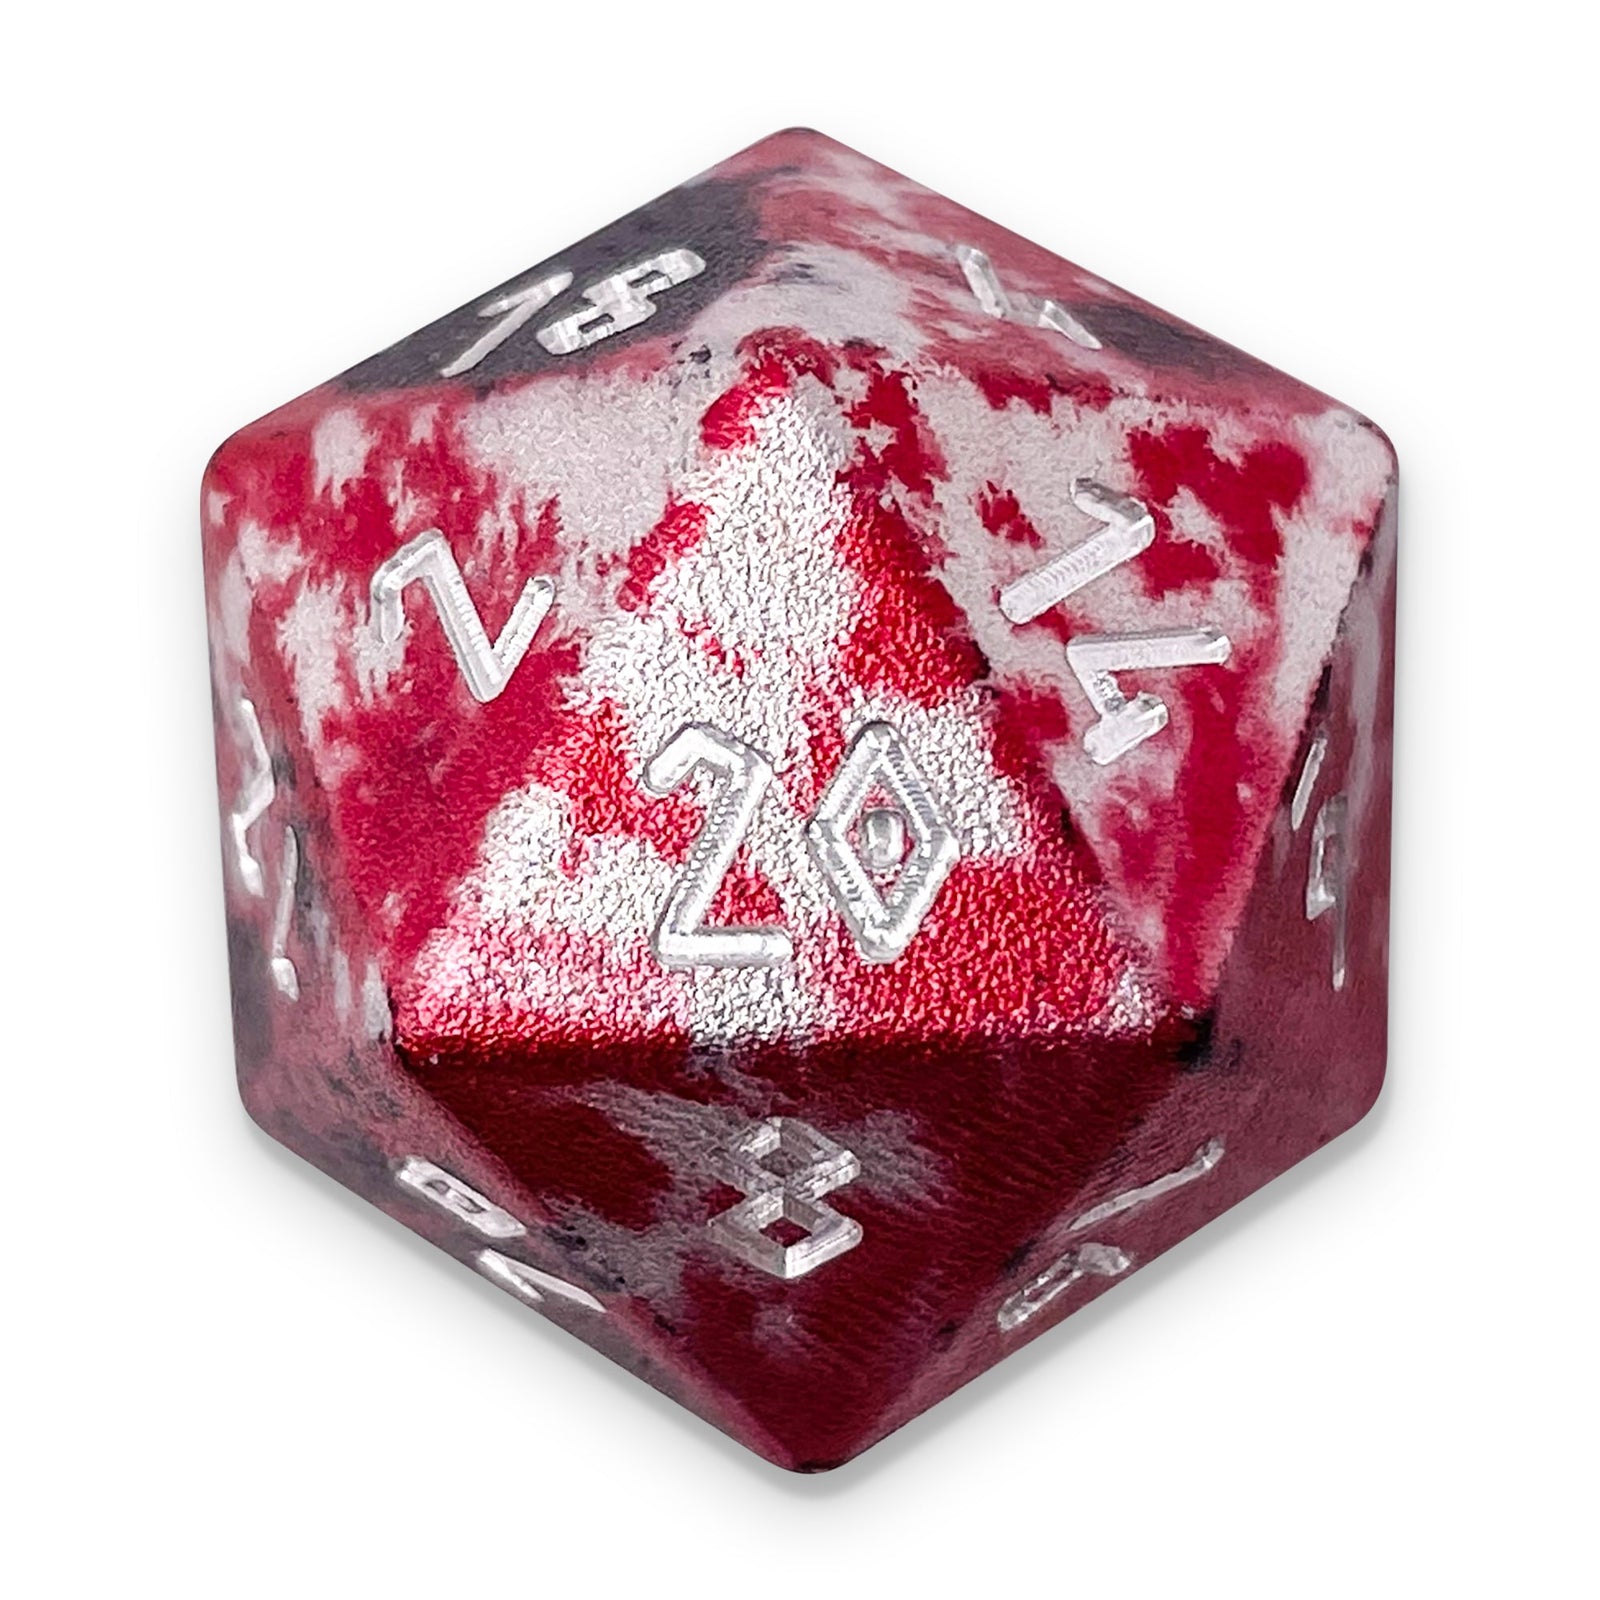 Single Wondrous Dice® D20 in Lich King by Norse Foundry - NOR 02409